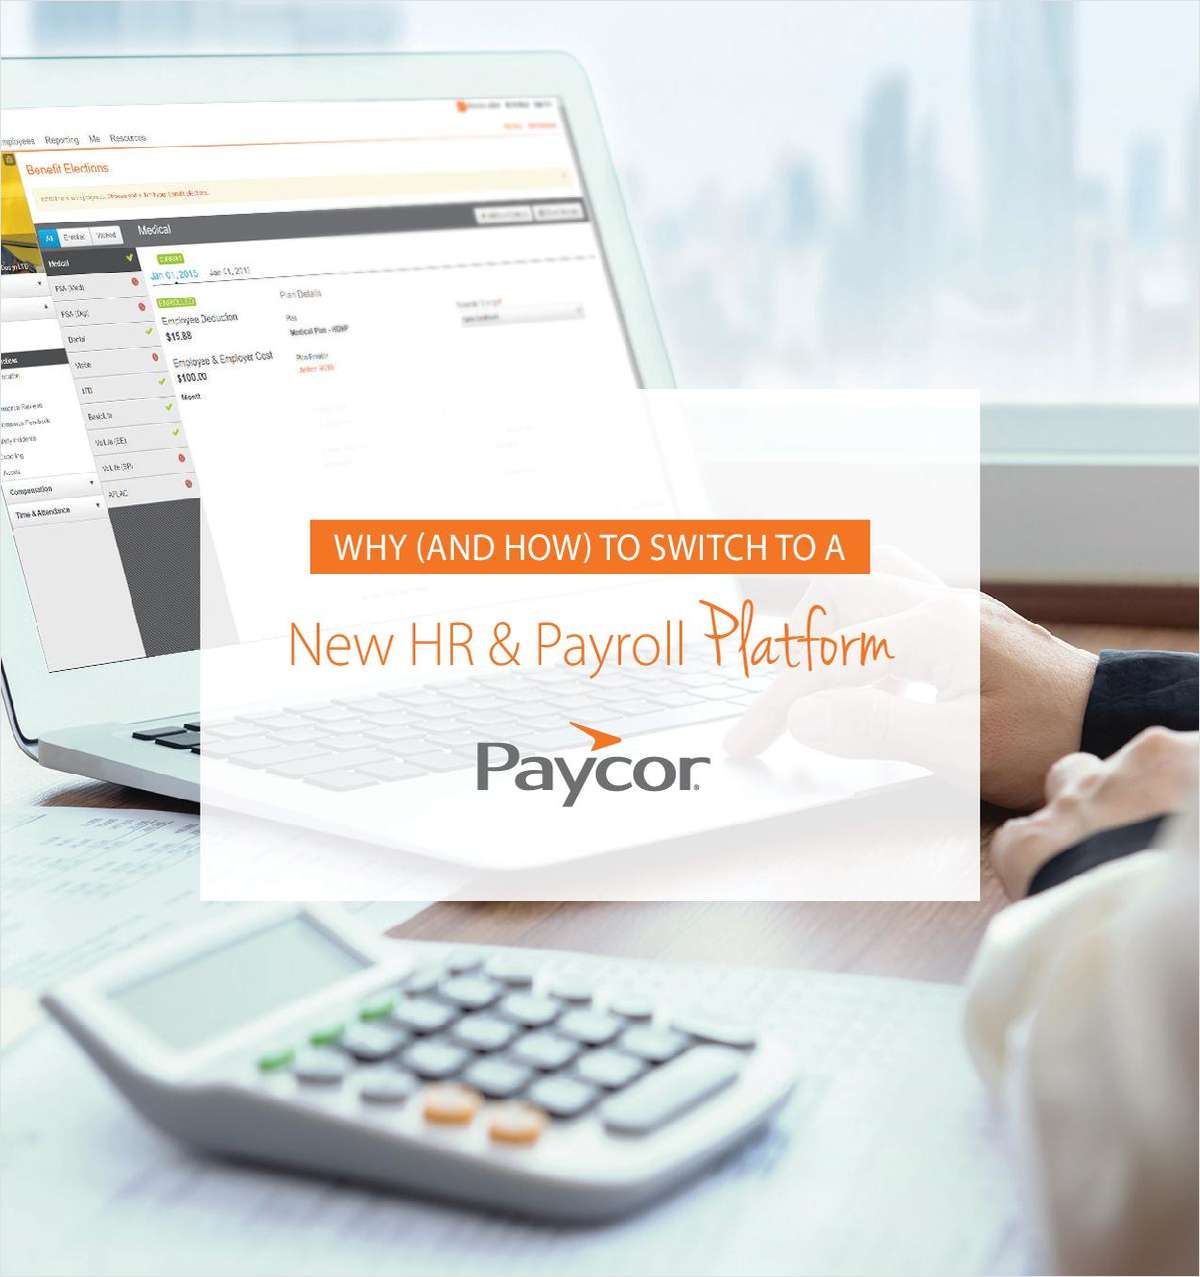 Why (and How) to Switch to a New HR & Payroll Platform